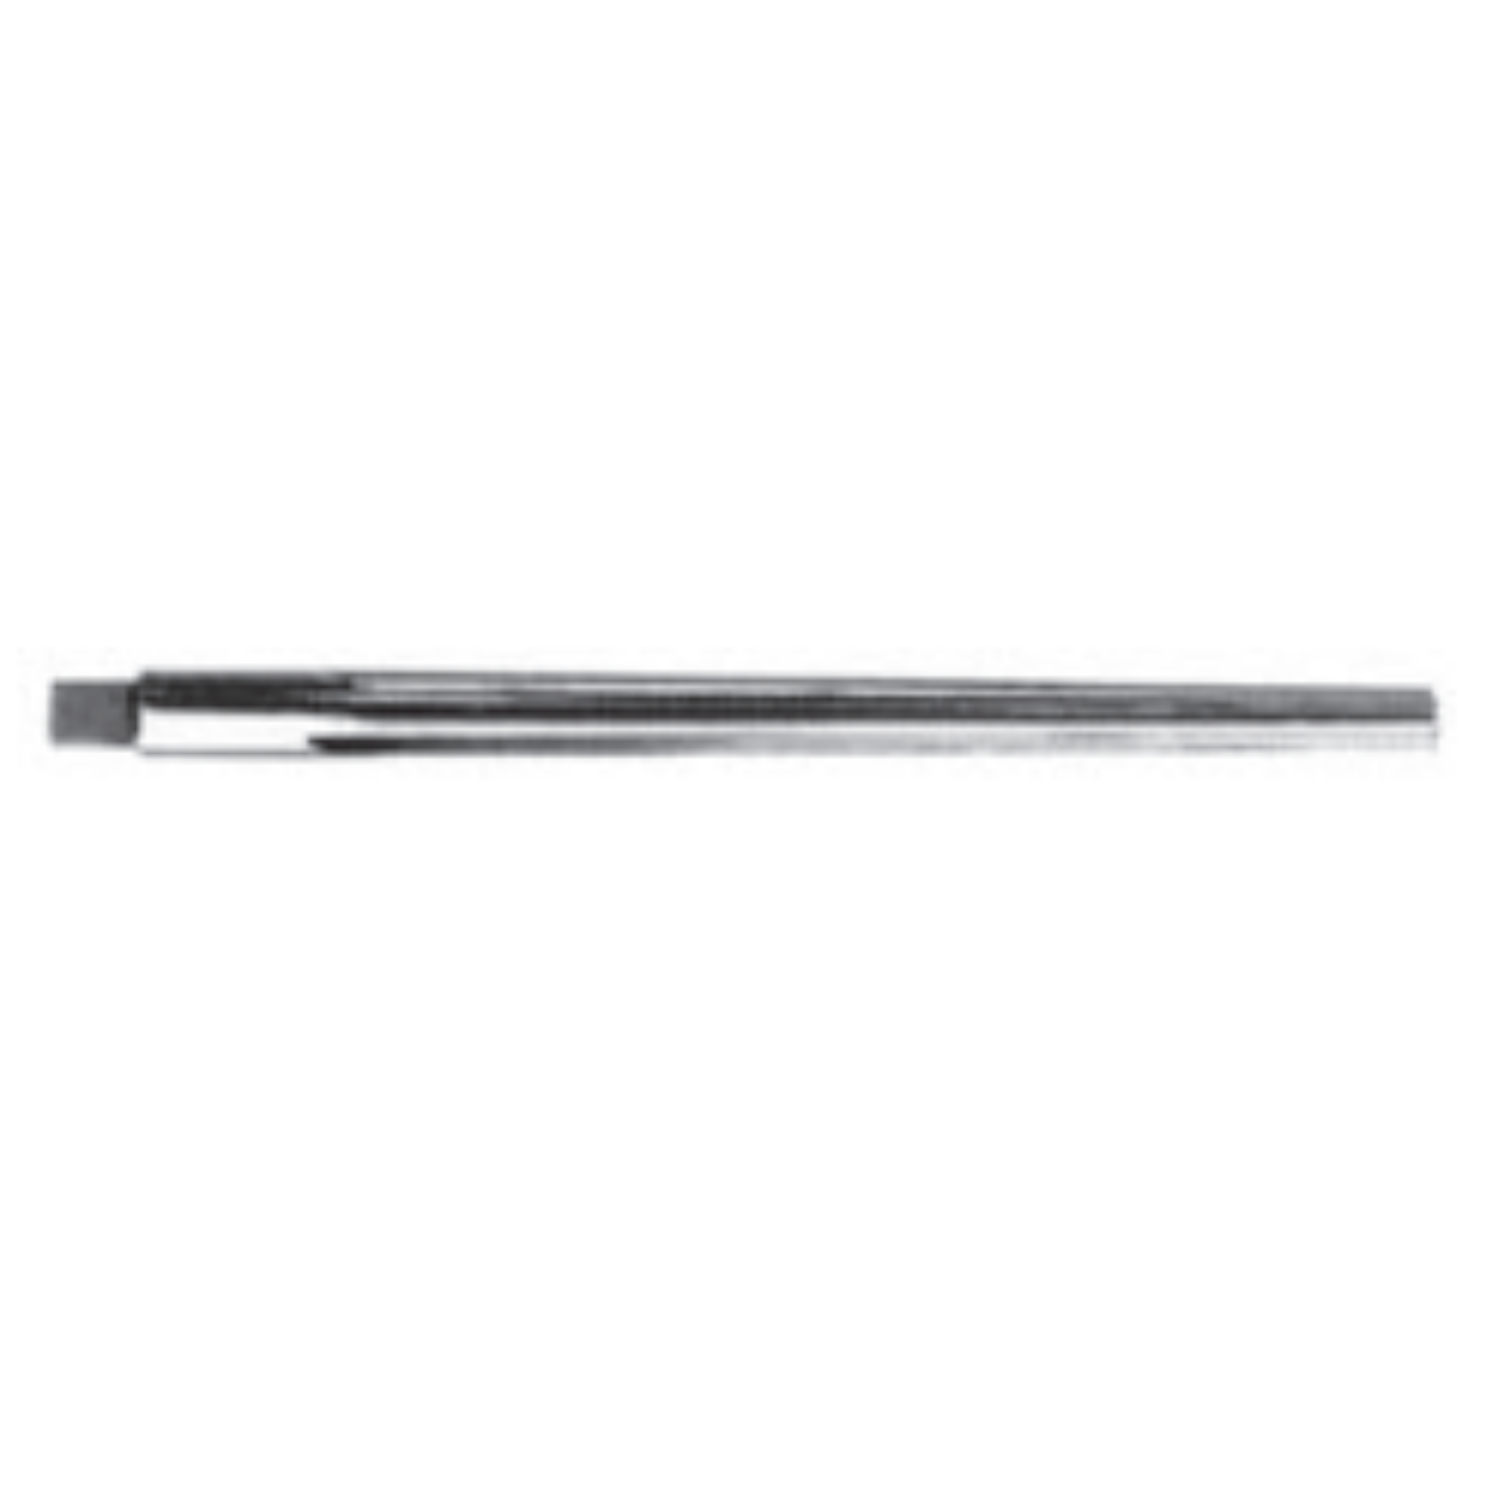 YEW AIK 6128 Taper Pin Reamers, Hand, Straight Metric, Fractional - Premium Taper Pin Reamers from YEW AIK - Shop now at Yew Aik.